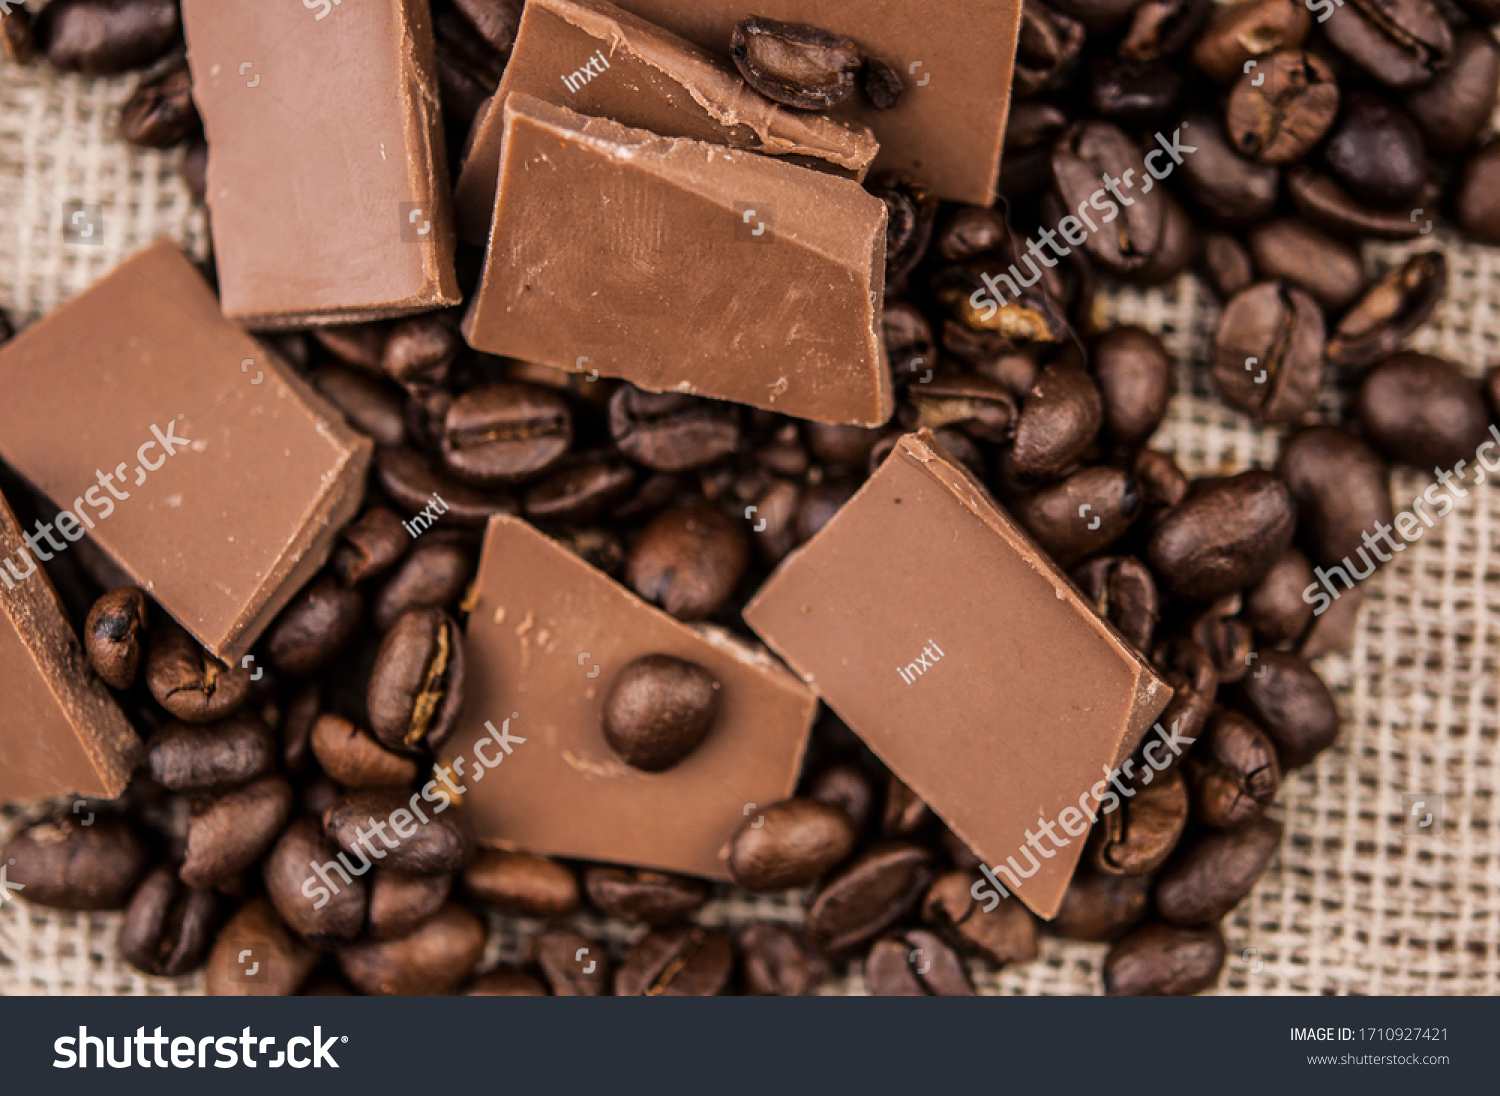 Chocolate and coffee beans on a textile background #1710927421